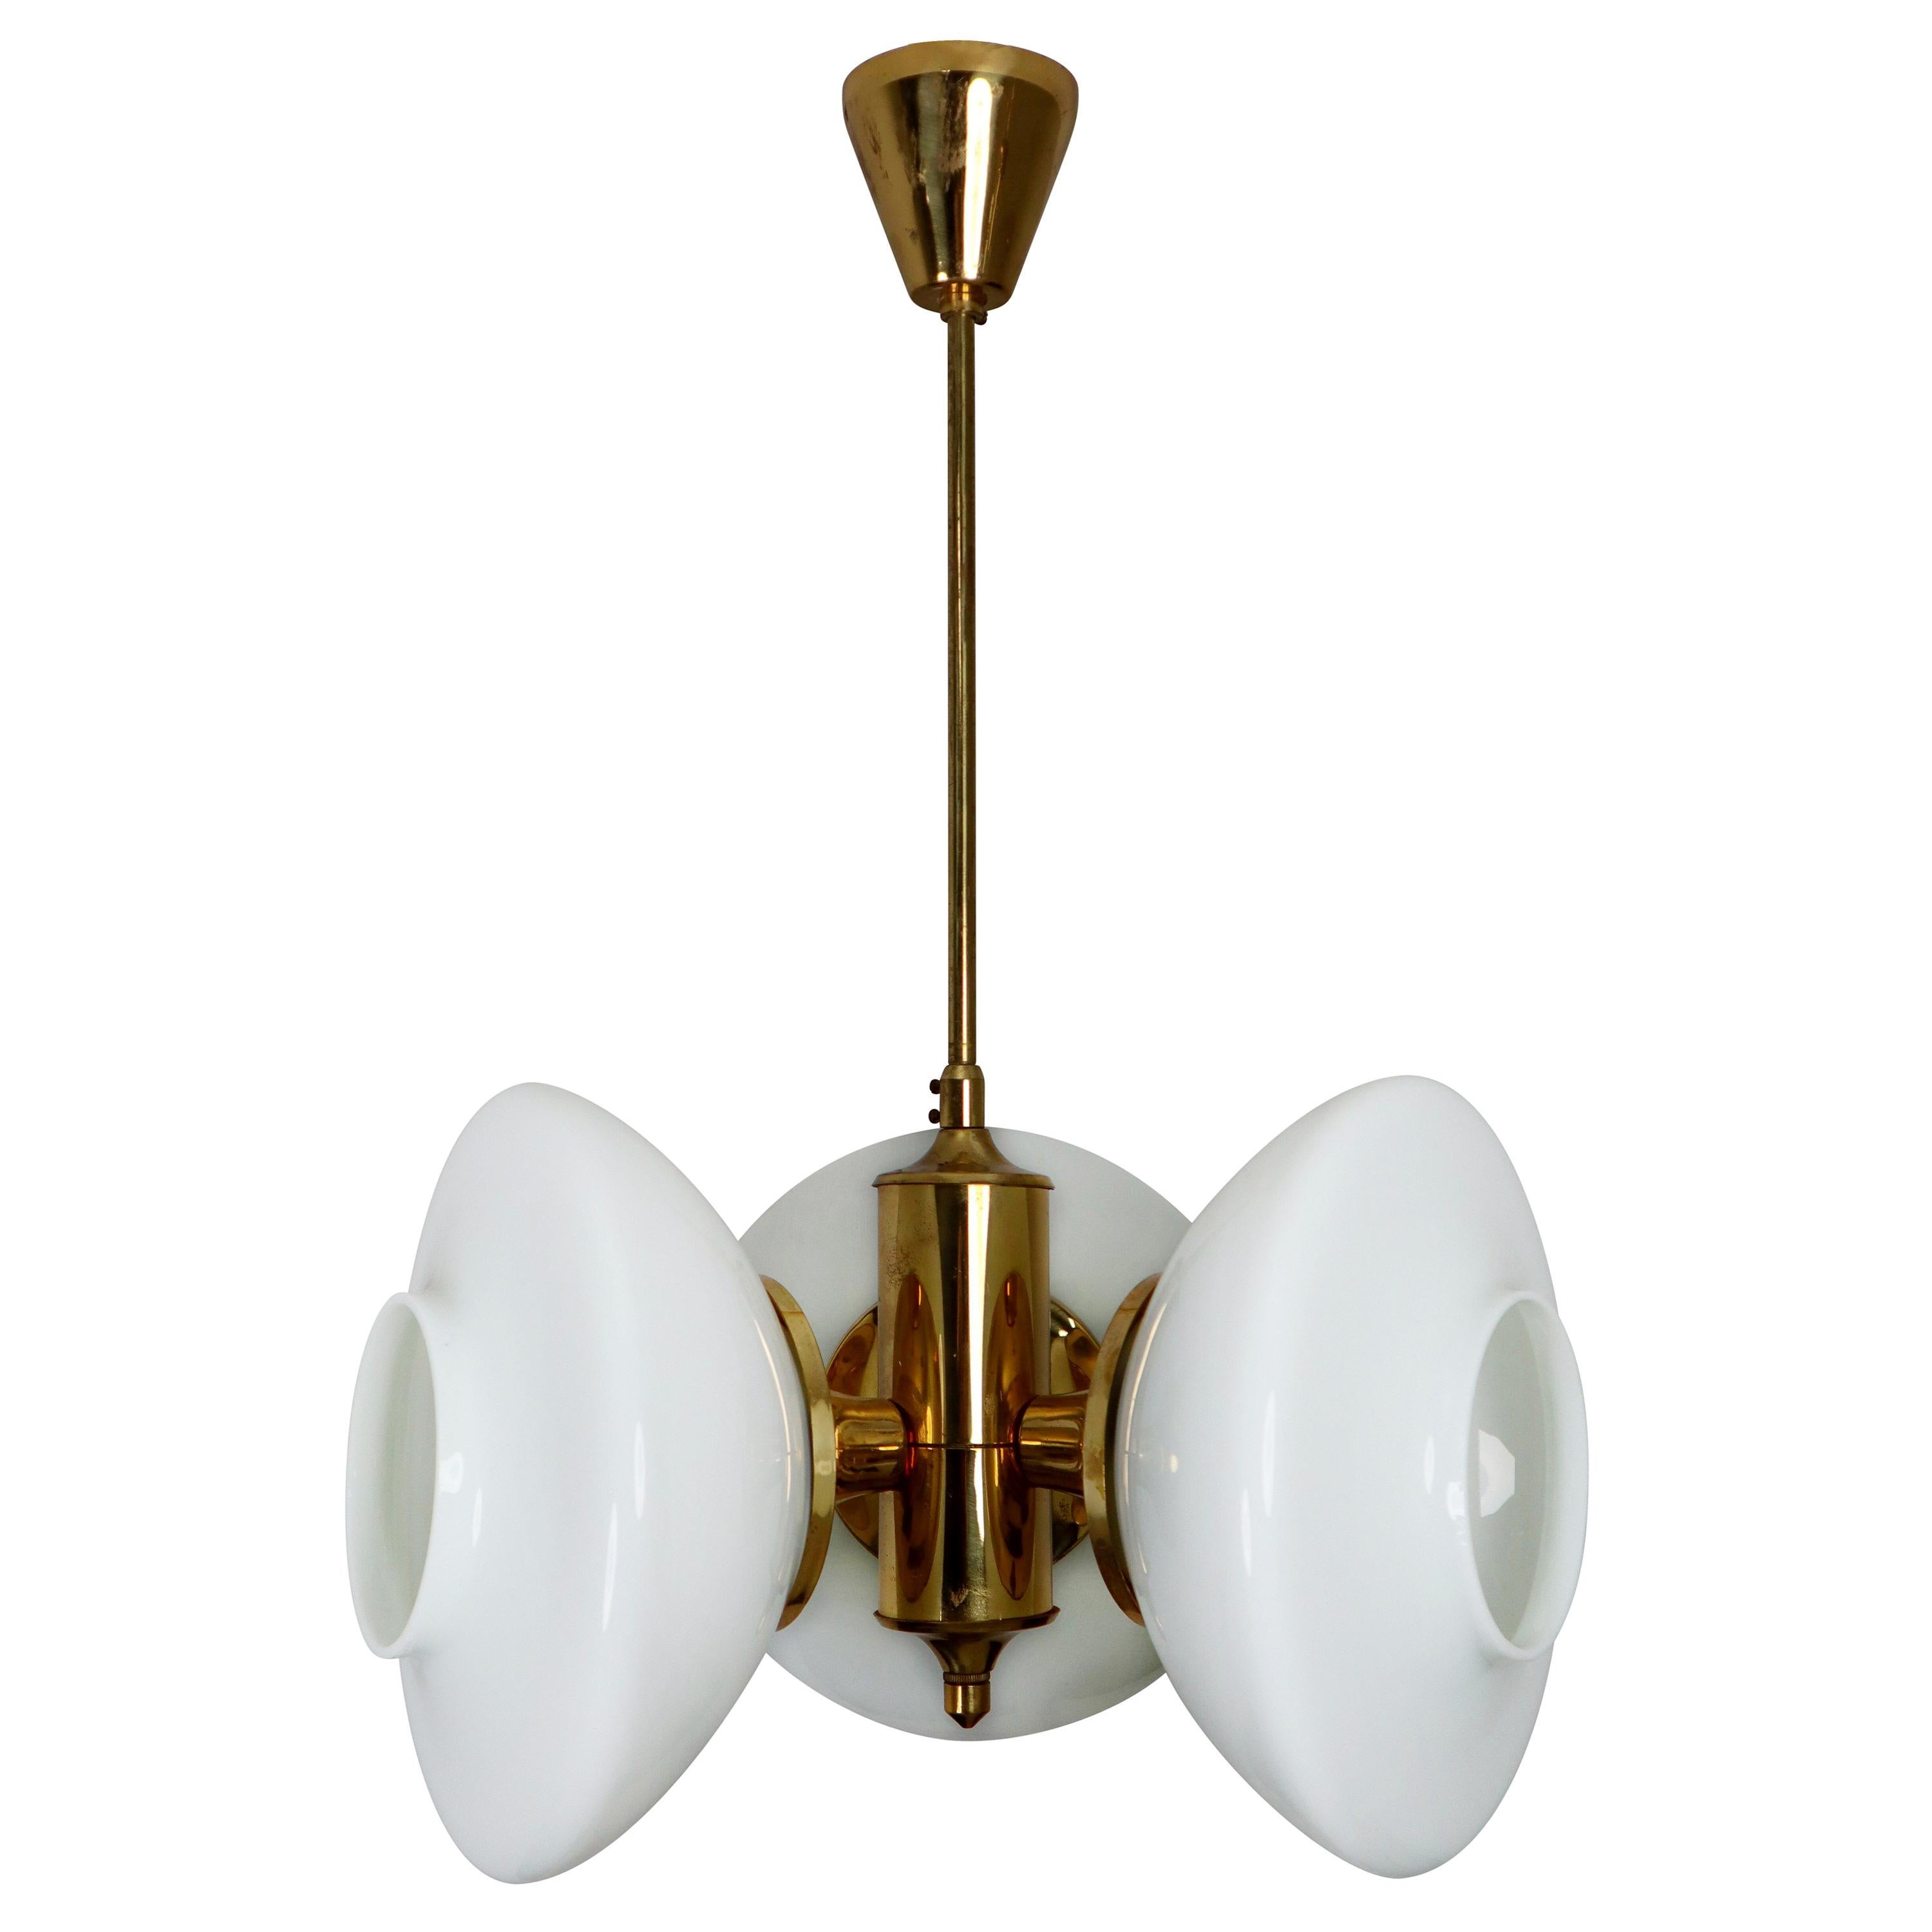 Midcentury Chandelier with Opaline Glass and Brass Fixture, Austria, 1960s  For Sale at 1stDibs